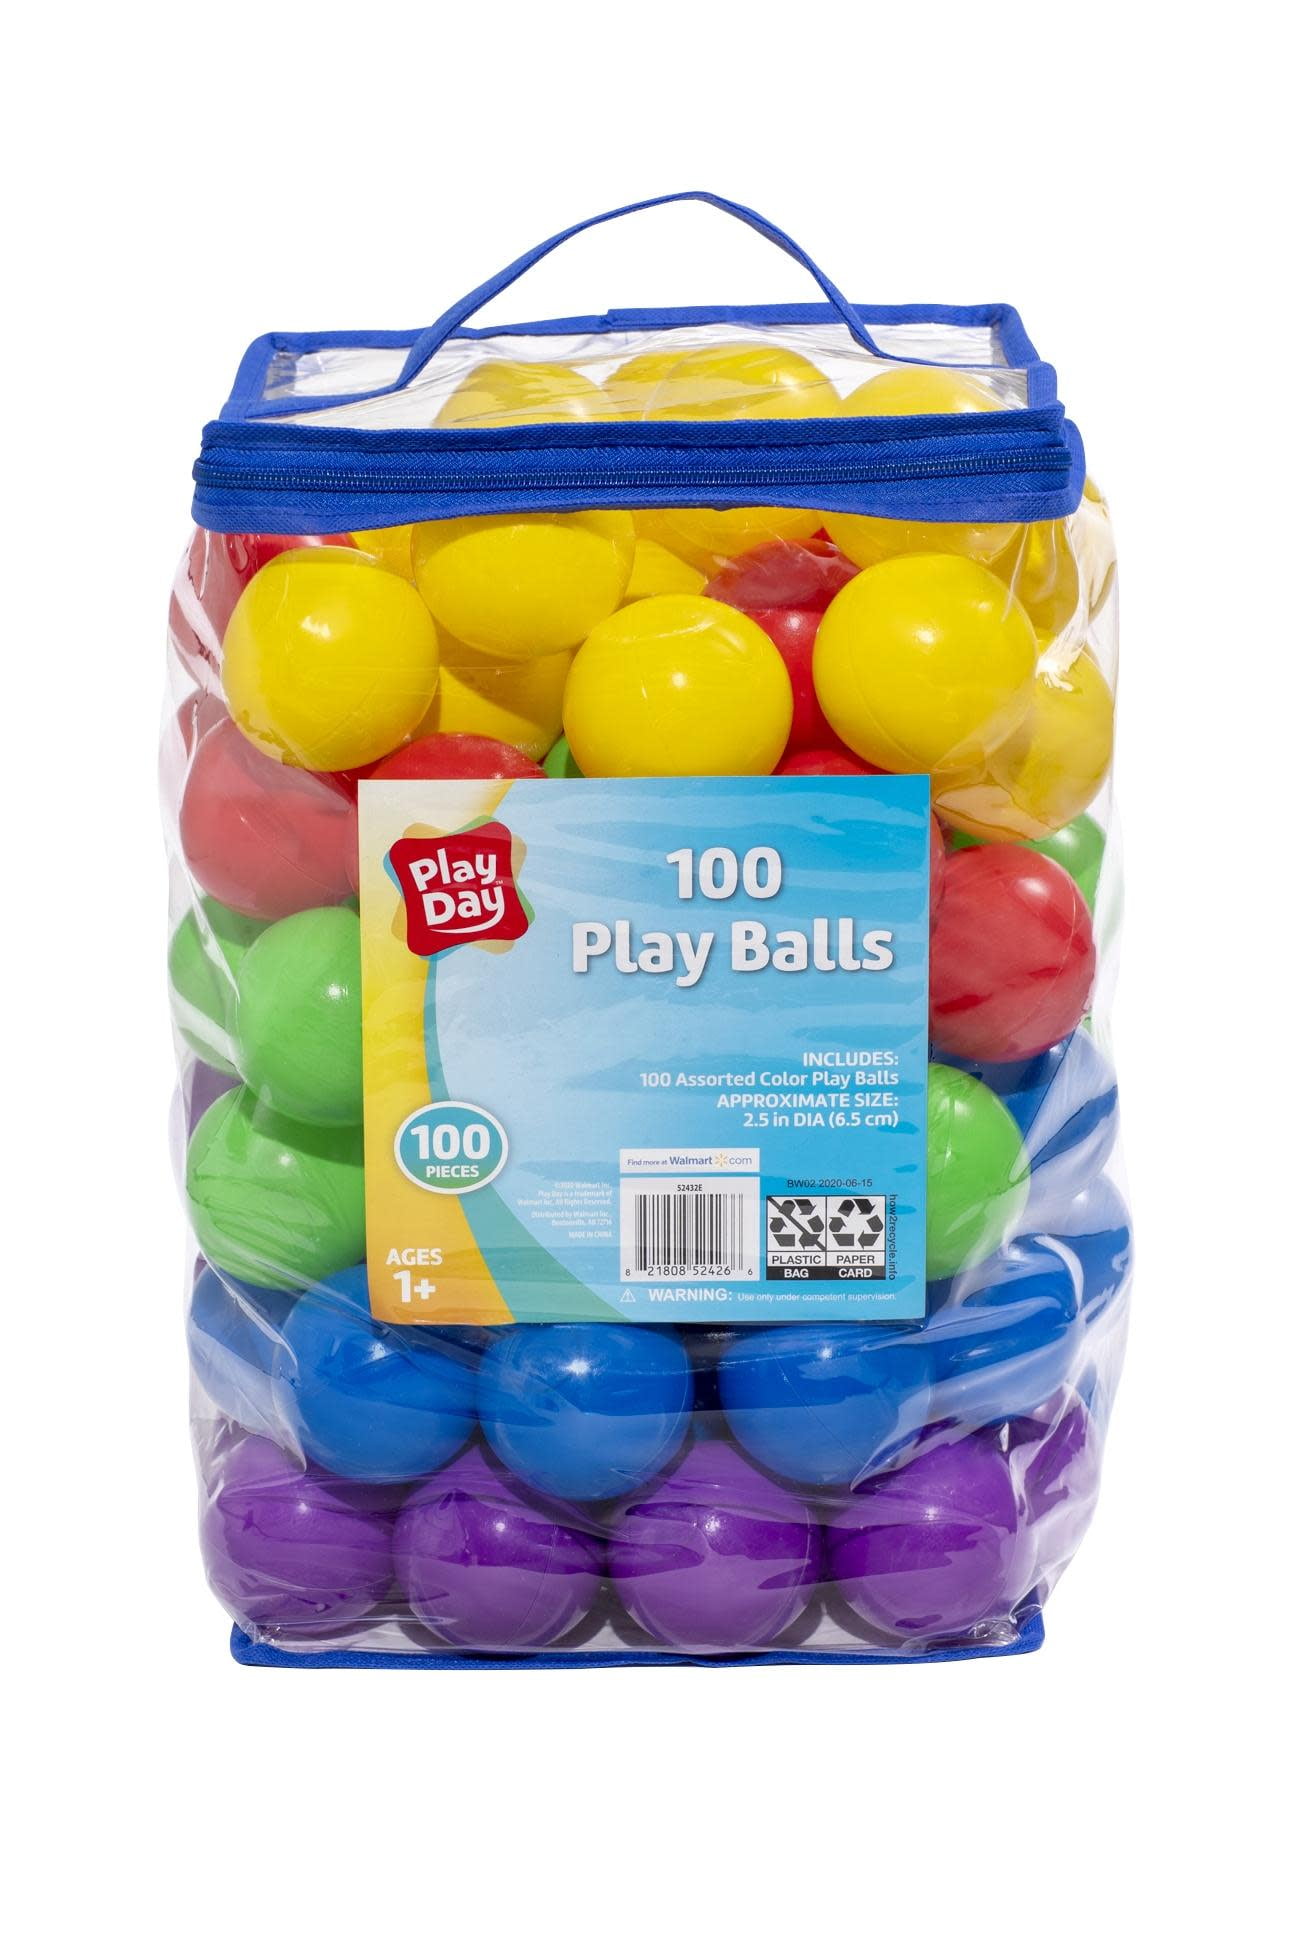 100 x Mini Play Balls Soft Plastic Pink & White Colour Ideal For Ball pit 